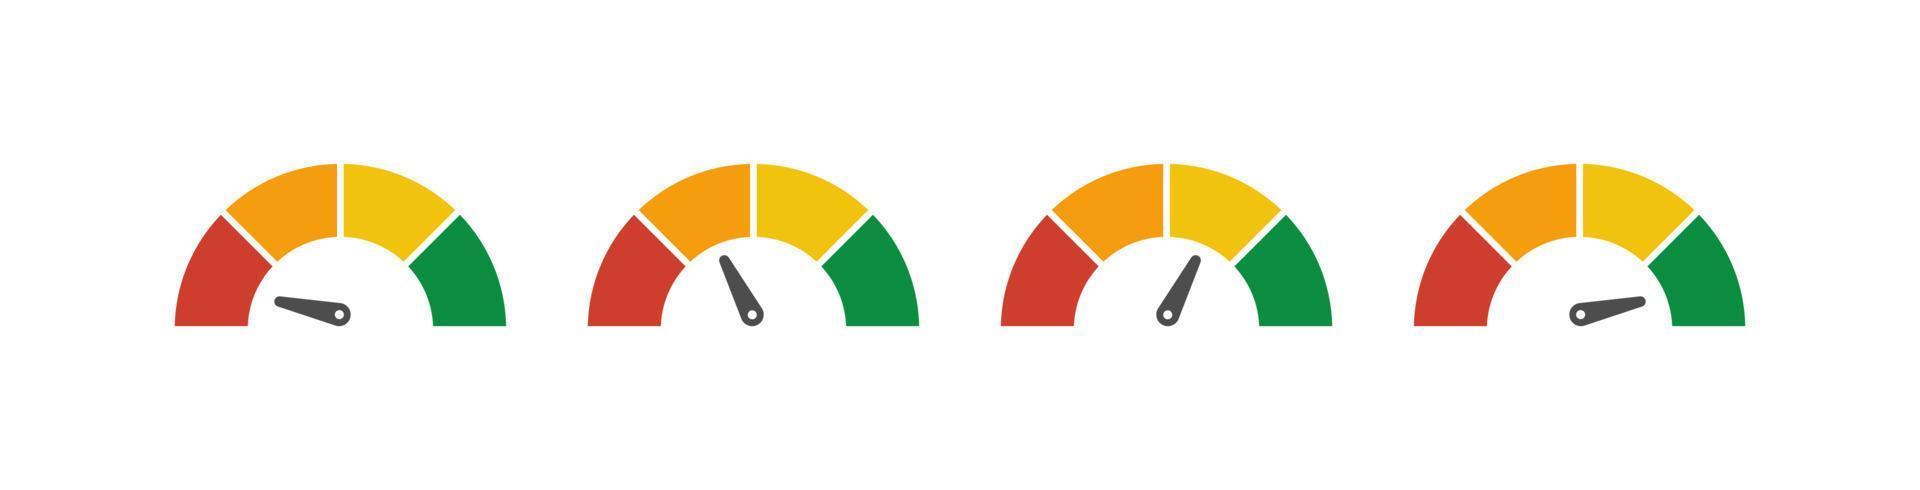 Set of vector speedometer meter with arrow for dashboard with green, yellow, red indicators. Gauge of tachometer. Low, medium, high and risk levels. Bitcoin fear and greed index cryptocurrency